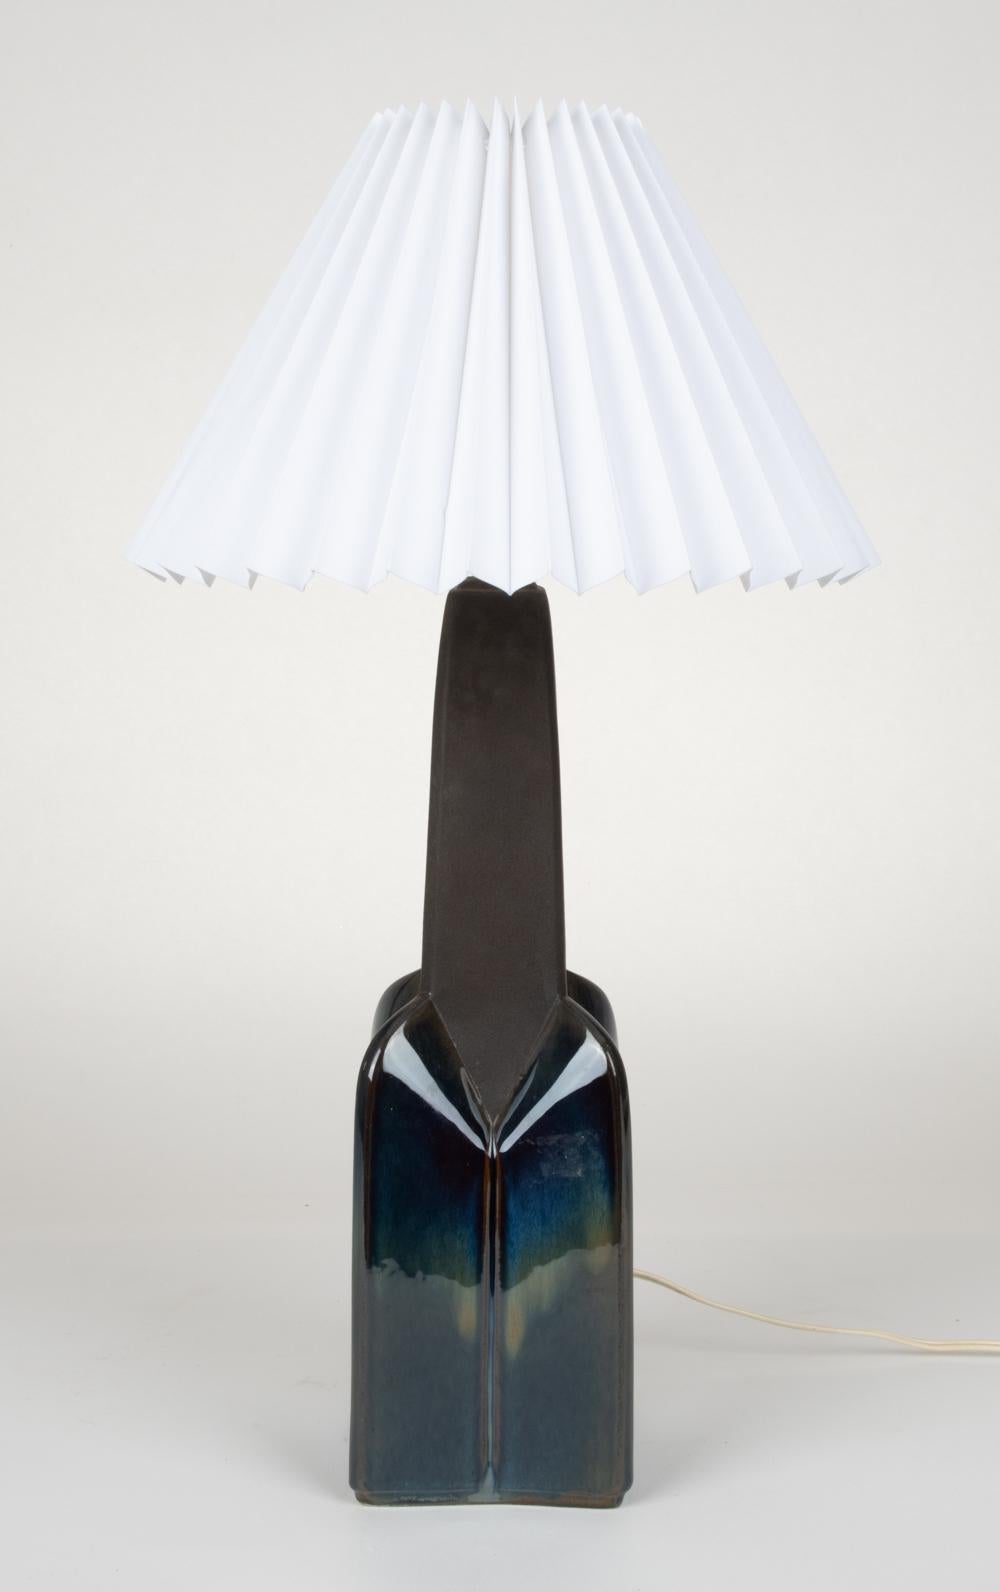 A striking Danish mid-century table lamp in ceramic with a metallic blue glaze, manufactured by Soholm Stentoj. This geometric faceted design with a sleek tapered top is attributed to Einar Johansen, who partnered with Soholm to create Scandinavian